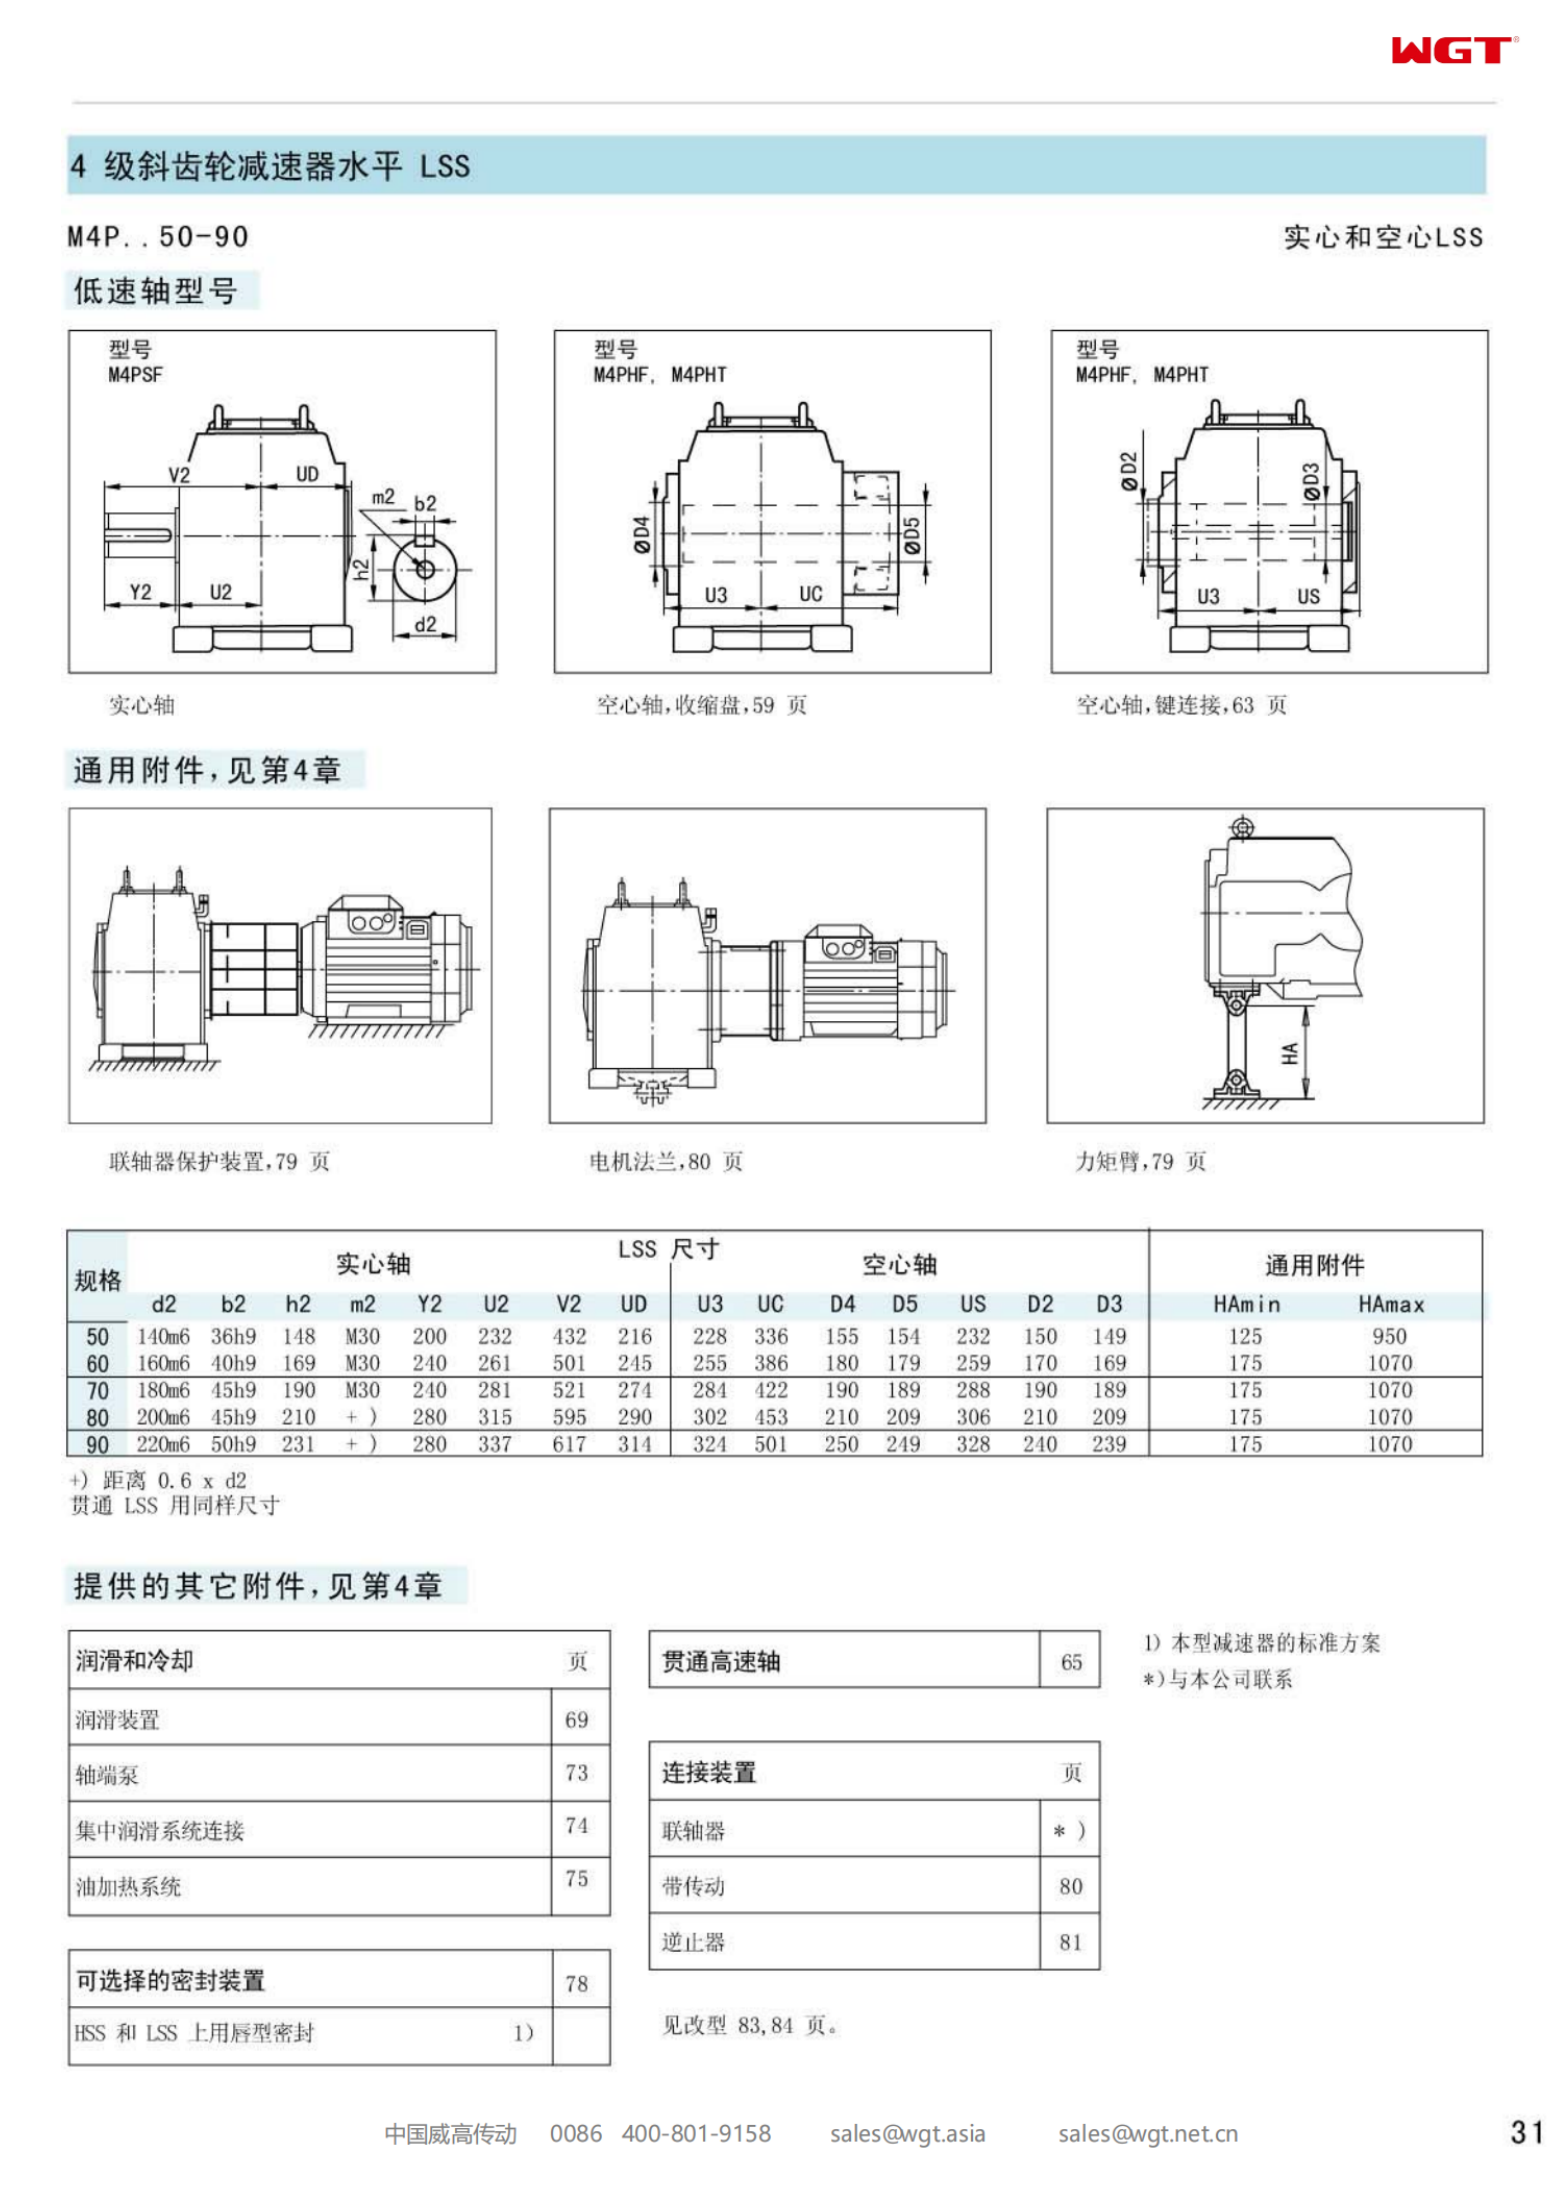 M4PHT60 Replace_SEW_M_Series Gearbox